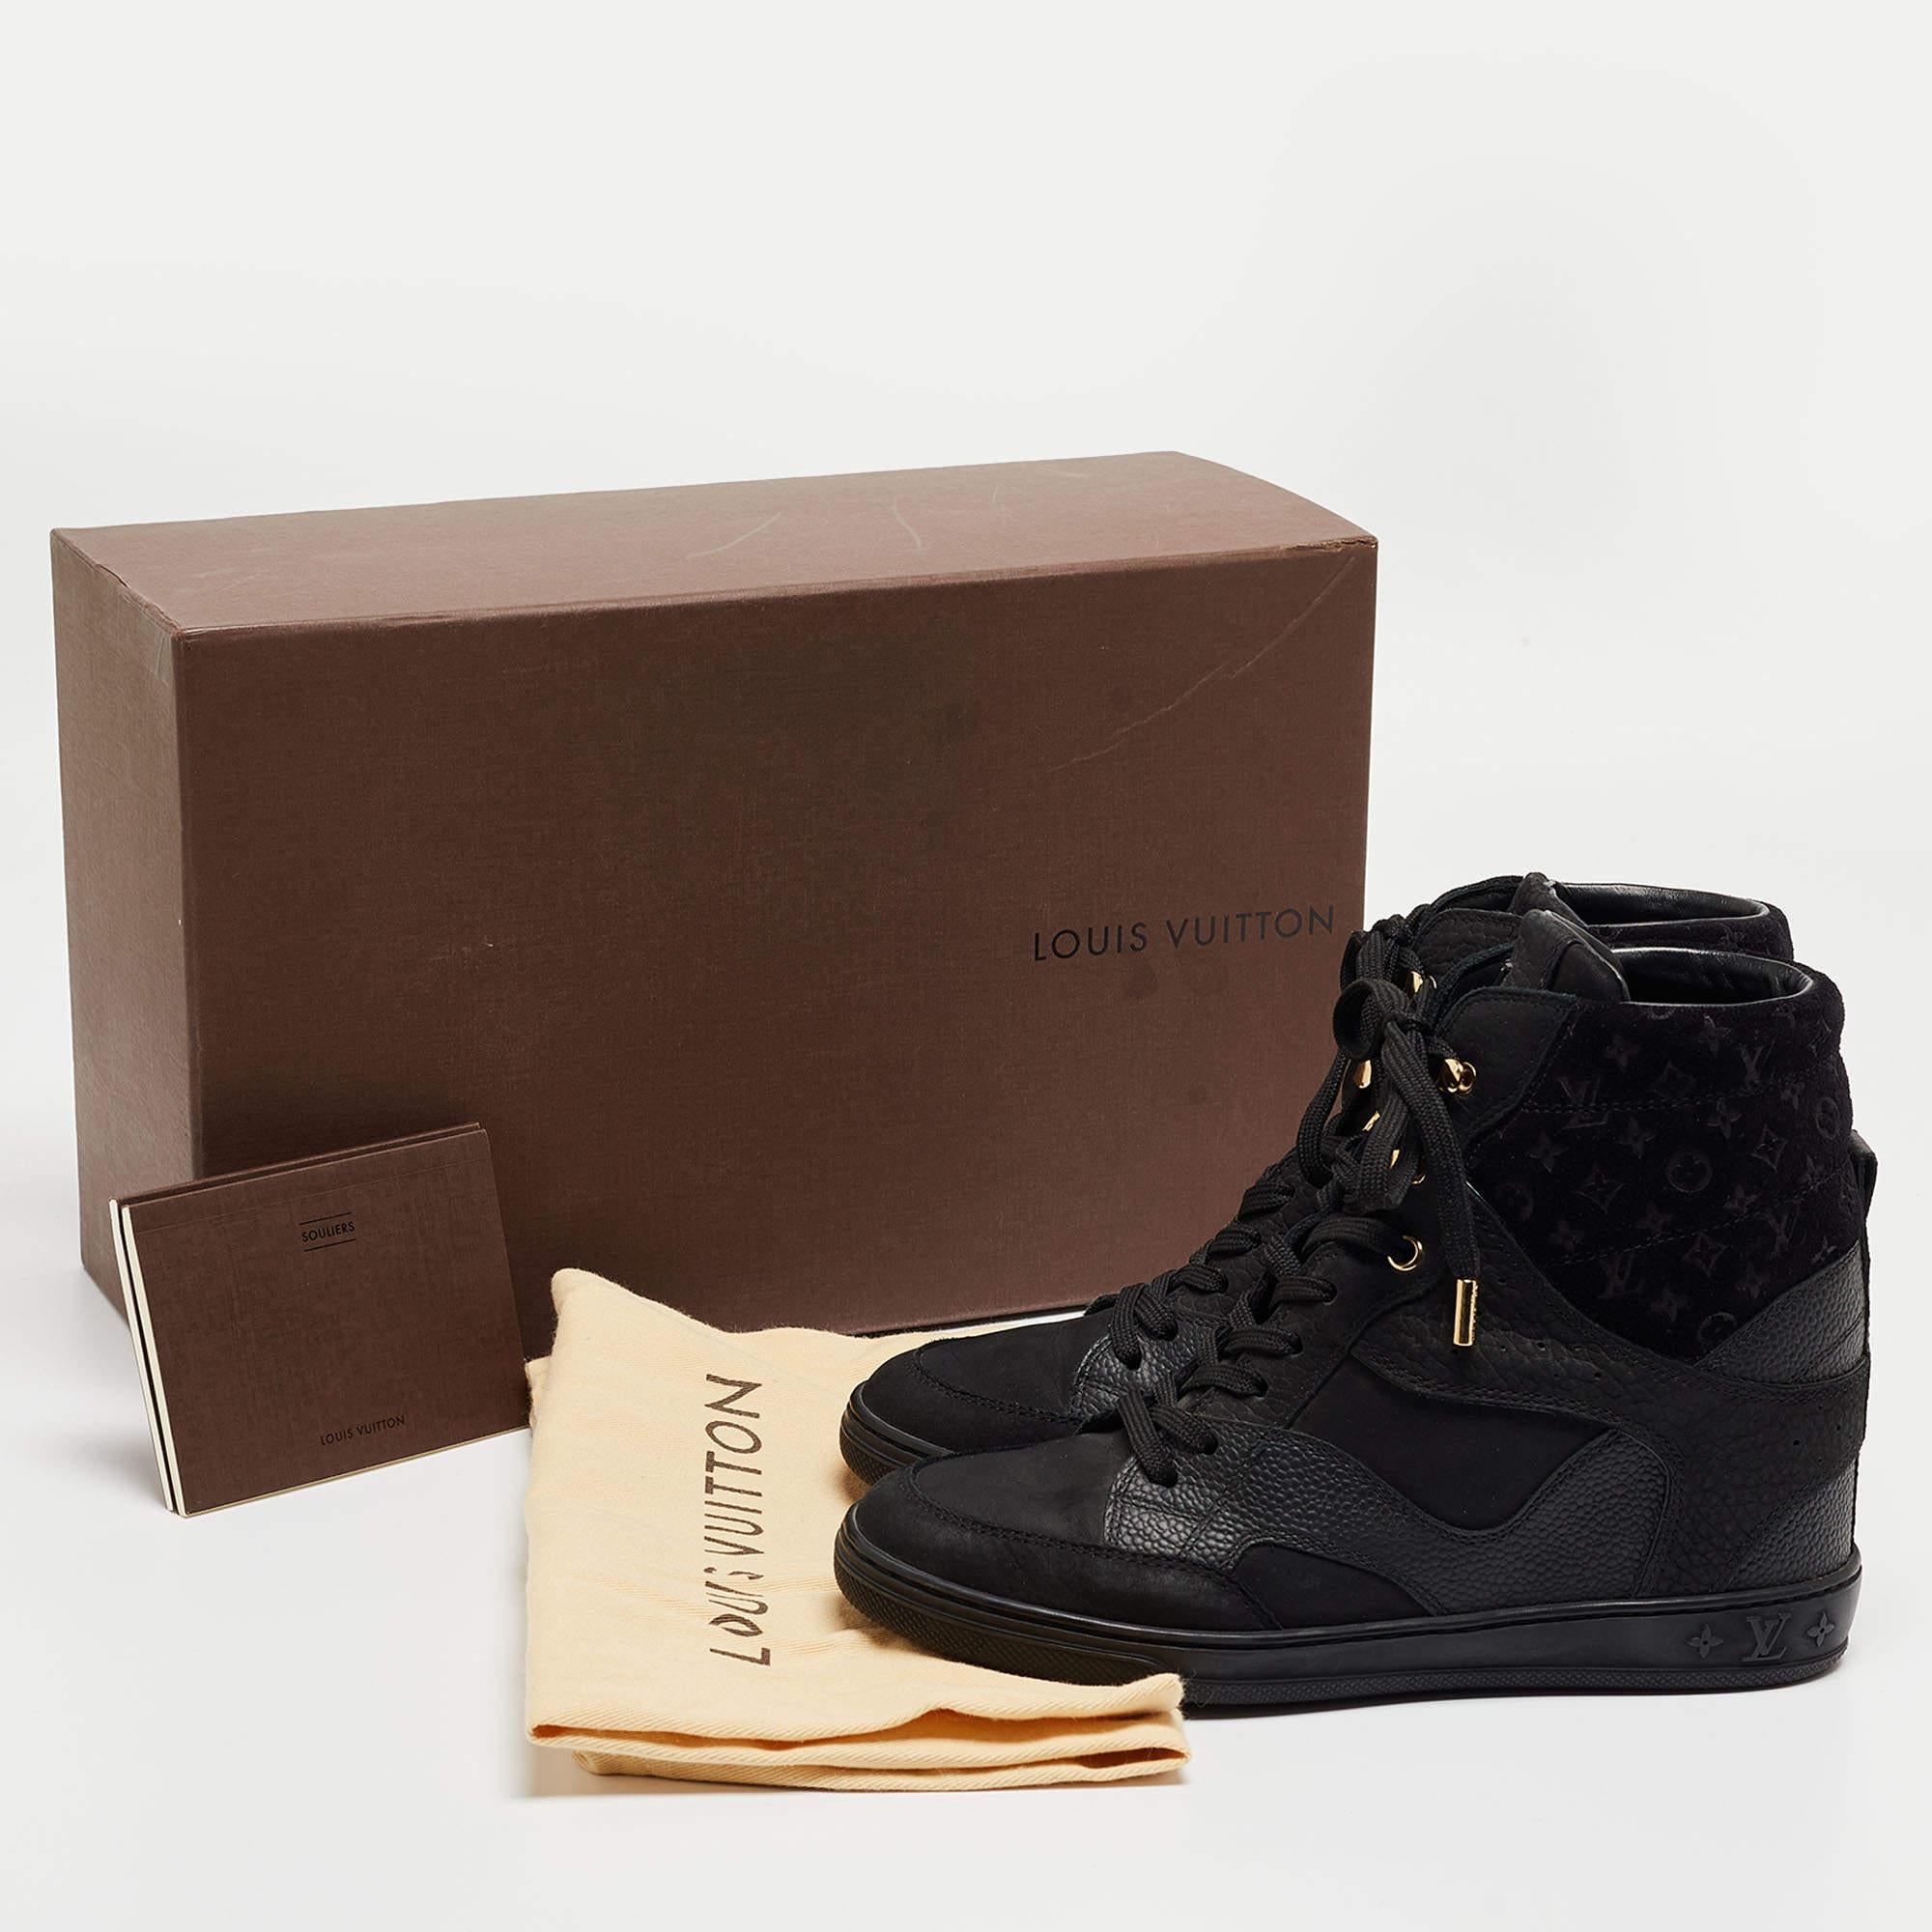 Louis Vuitton Black Leather and Monogram Suede Cliff Wedge Sneakers Size 37 For Sale 2